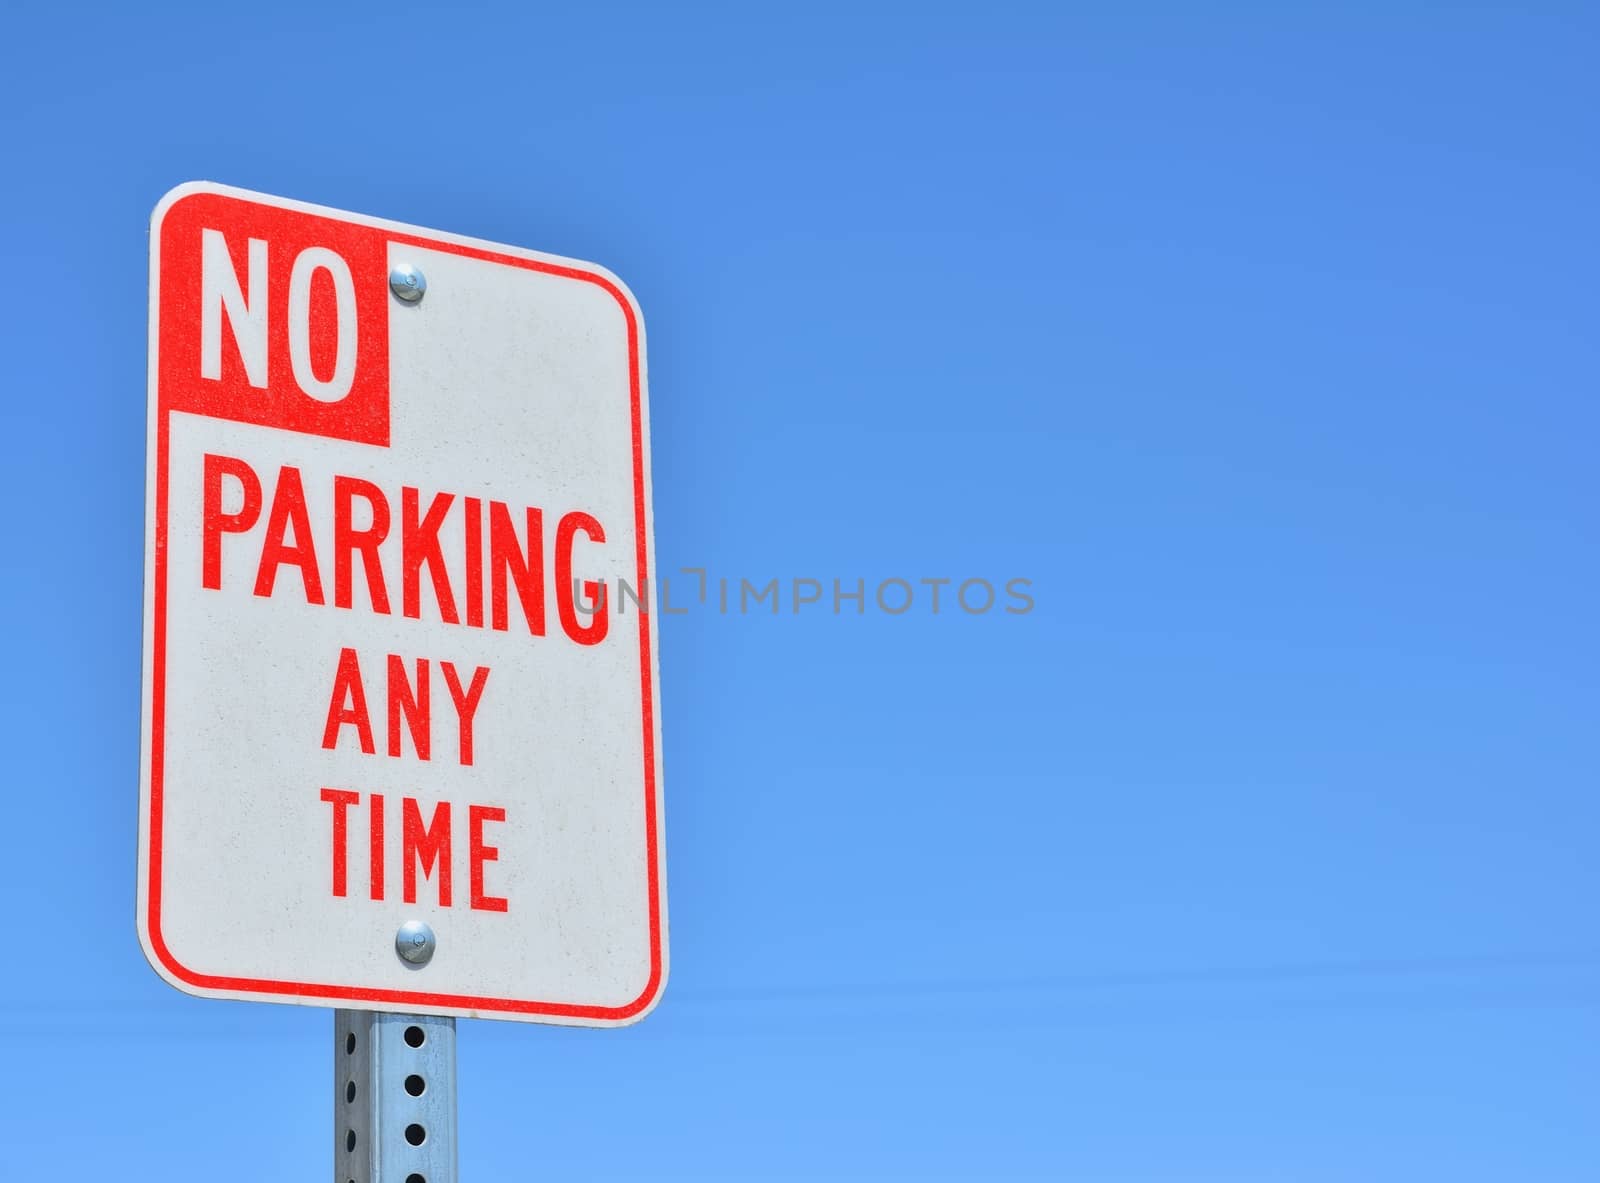 Red and white No Parking Any Time sign